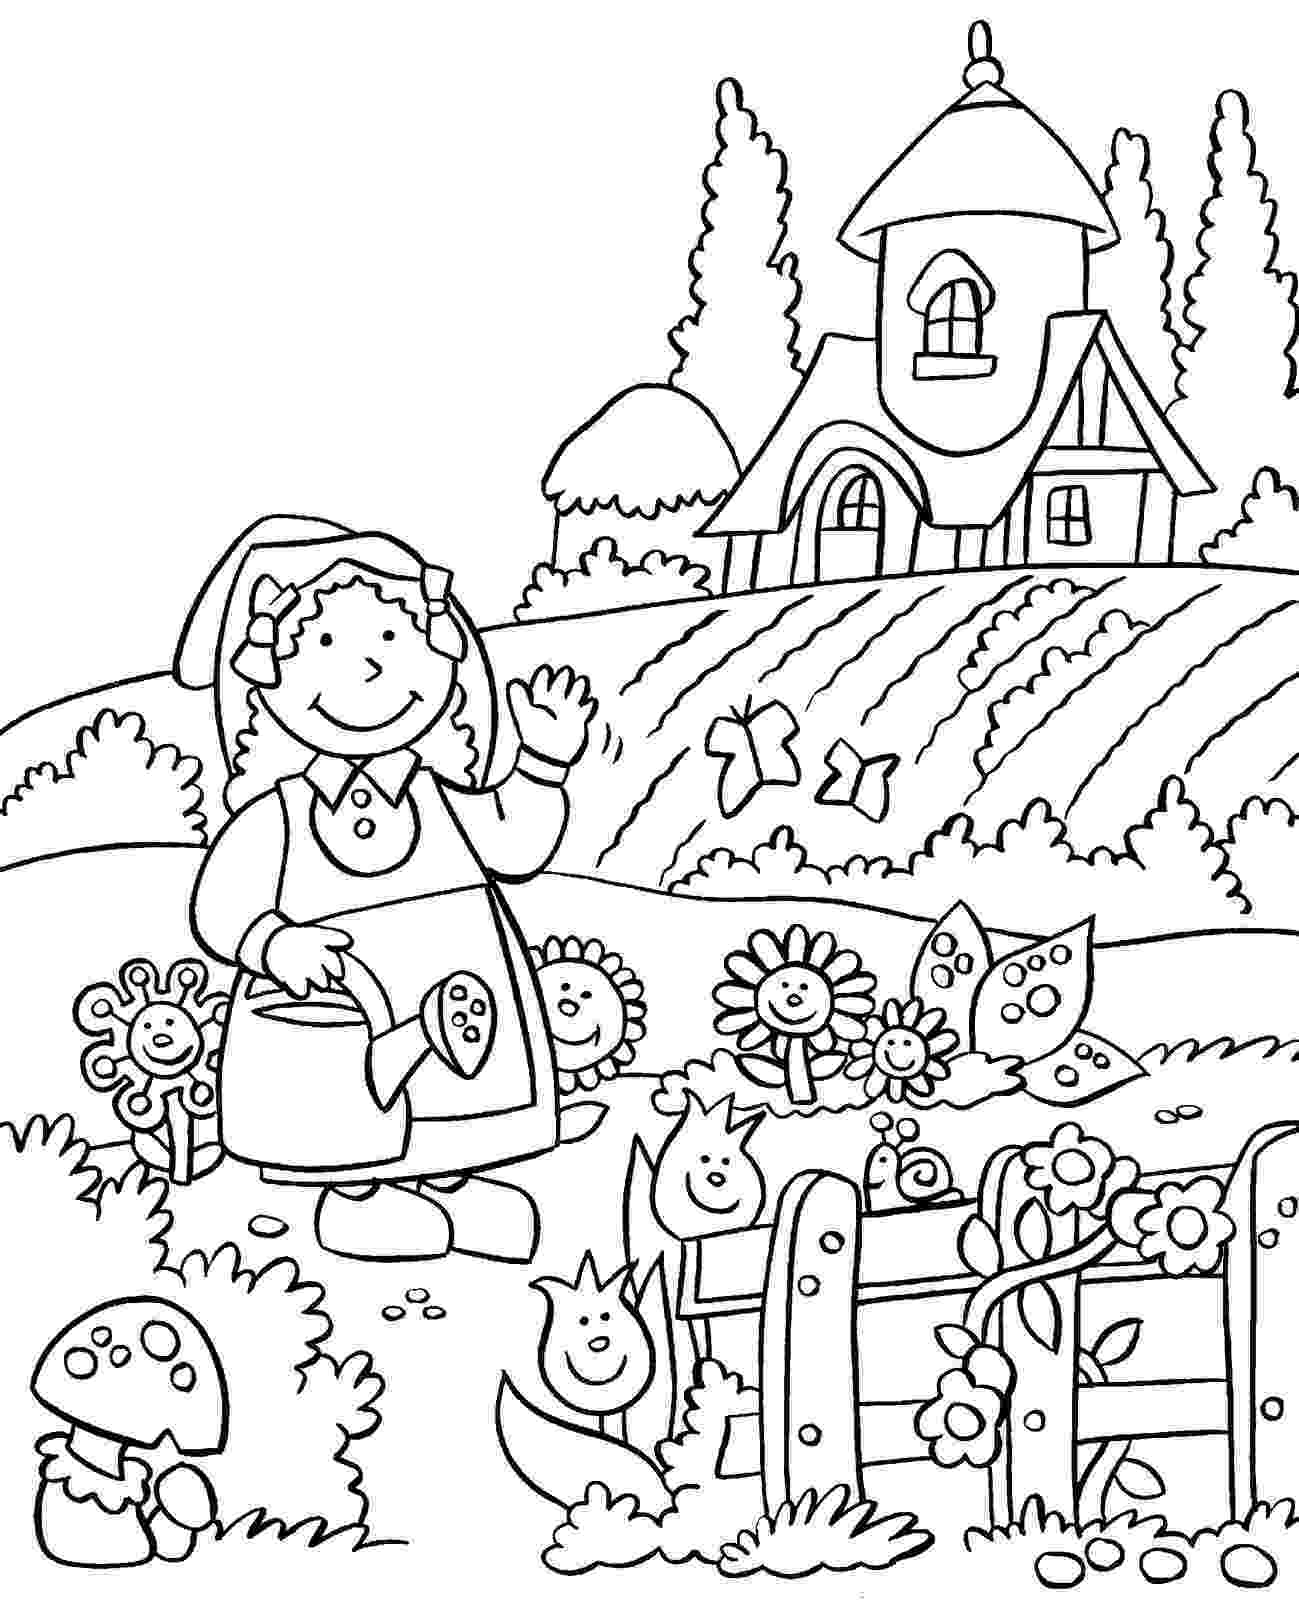 coloring pages of garden flowers flower garden coloring pages to download and print for free garden pages coloring flowers of 